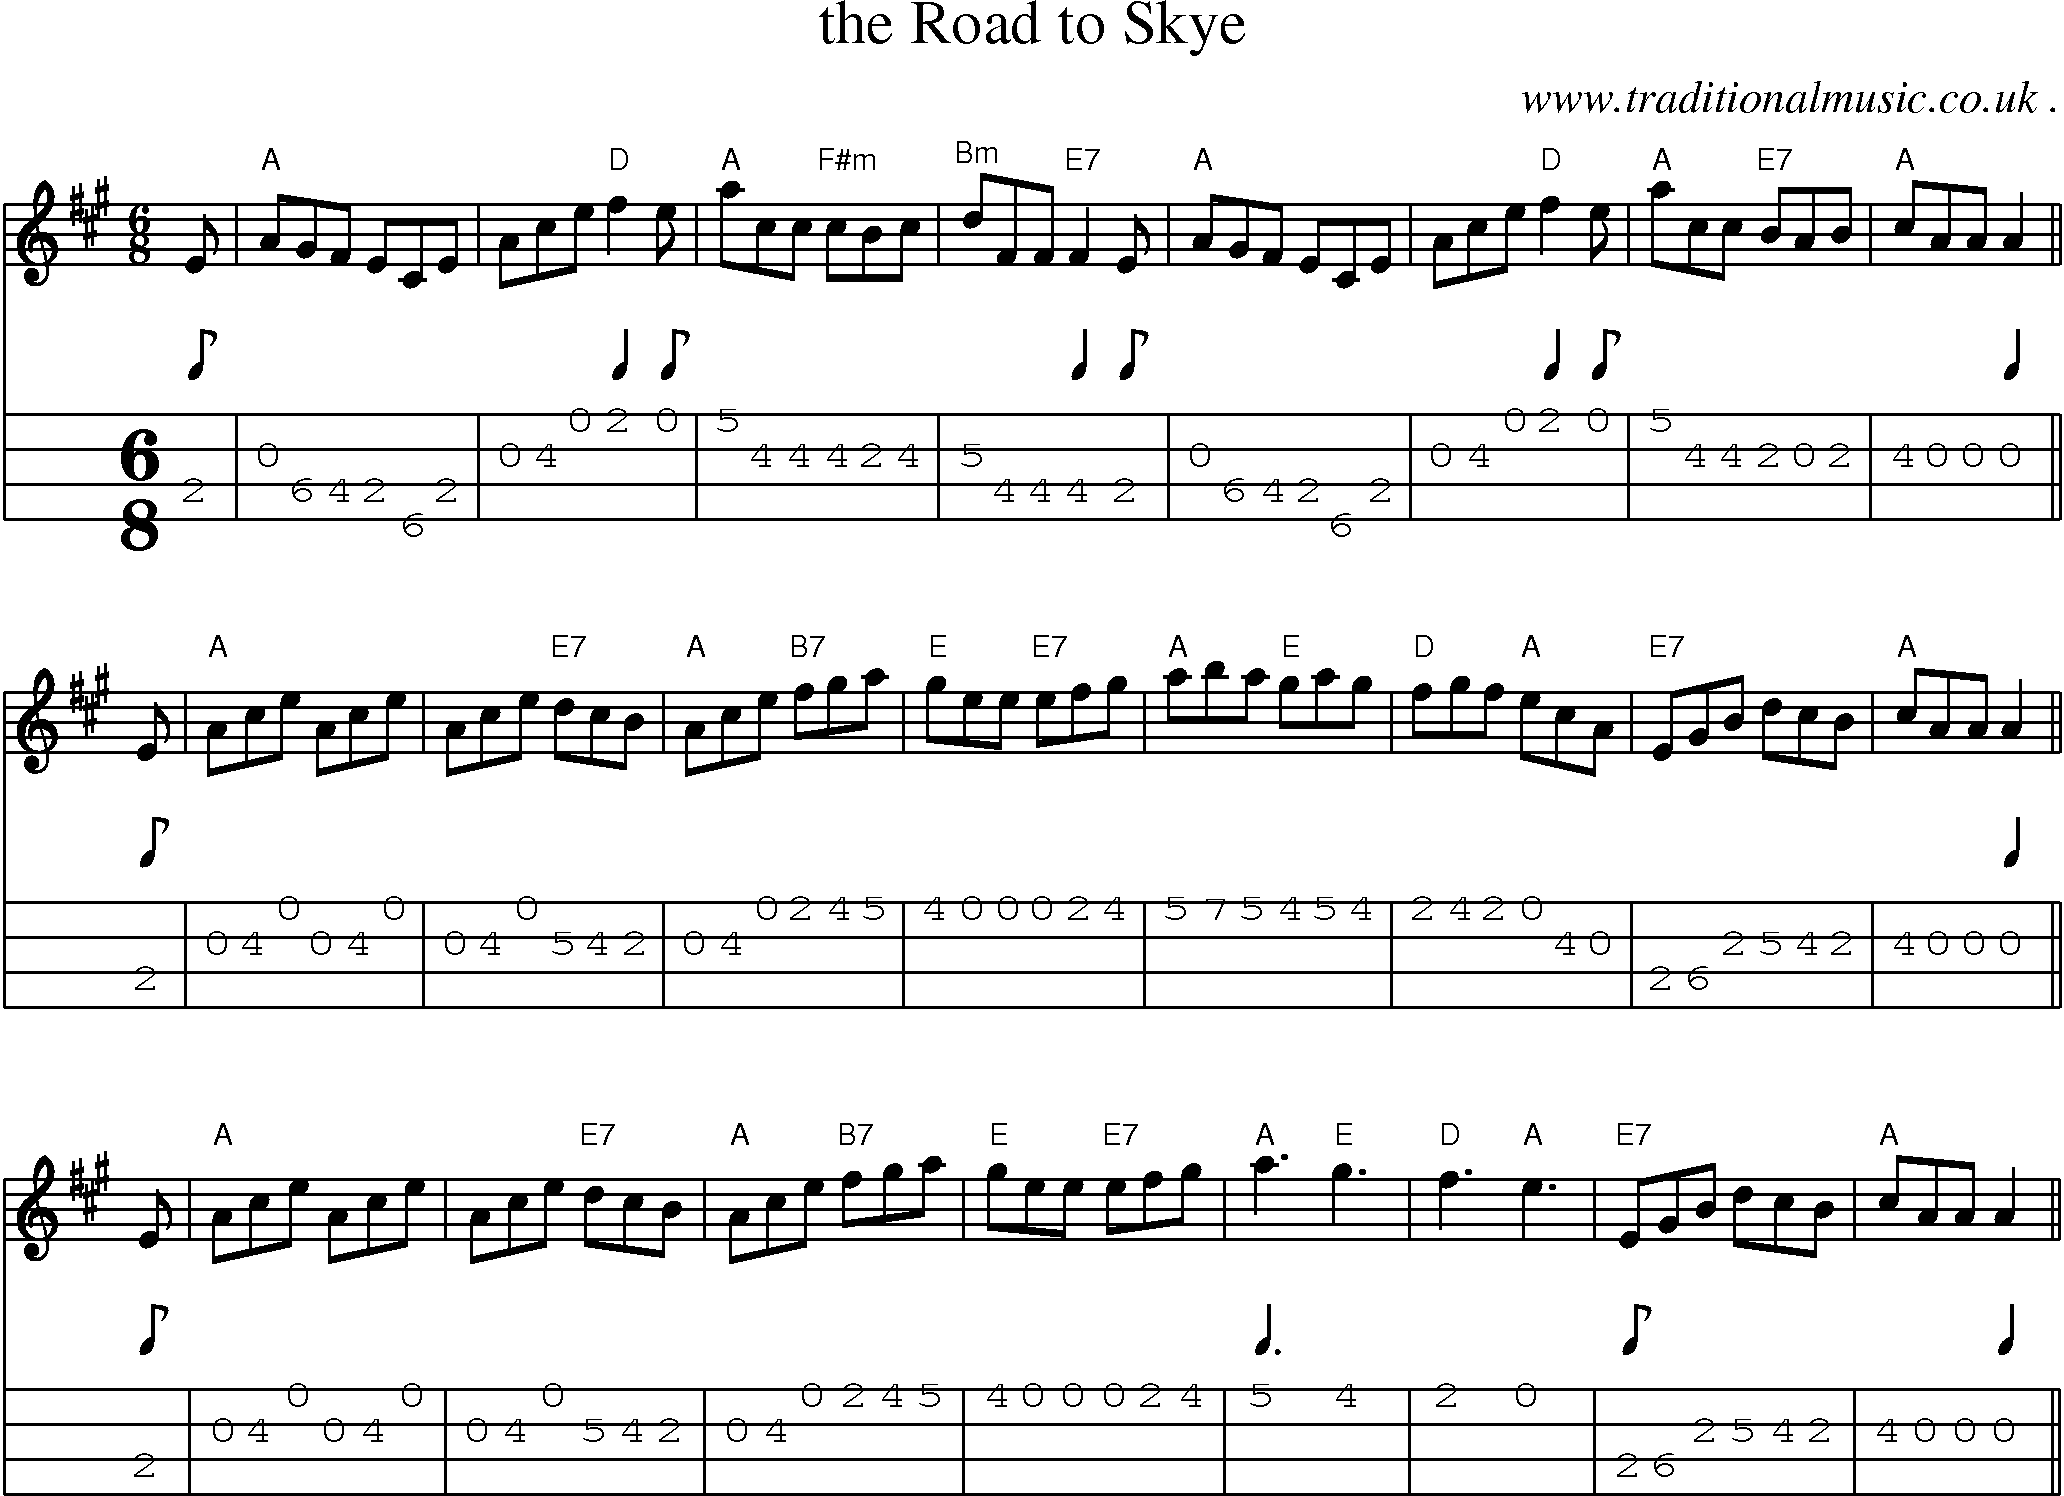 Sheet-music  score, Chords and Mandolin Tabs for The Road To Skye